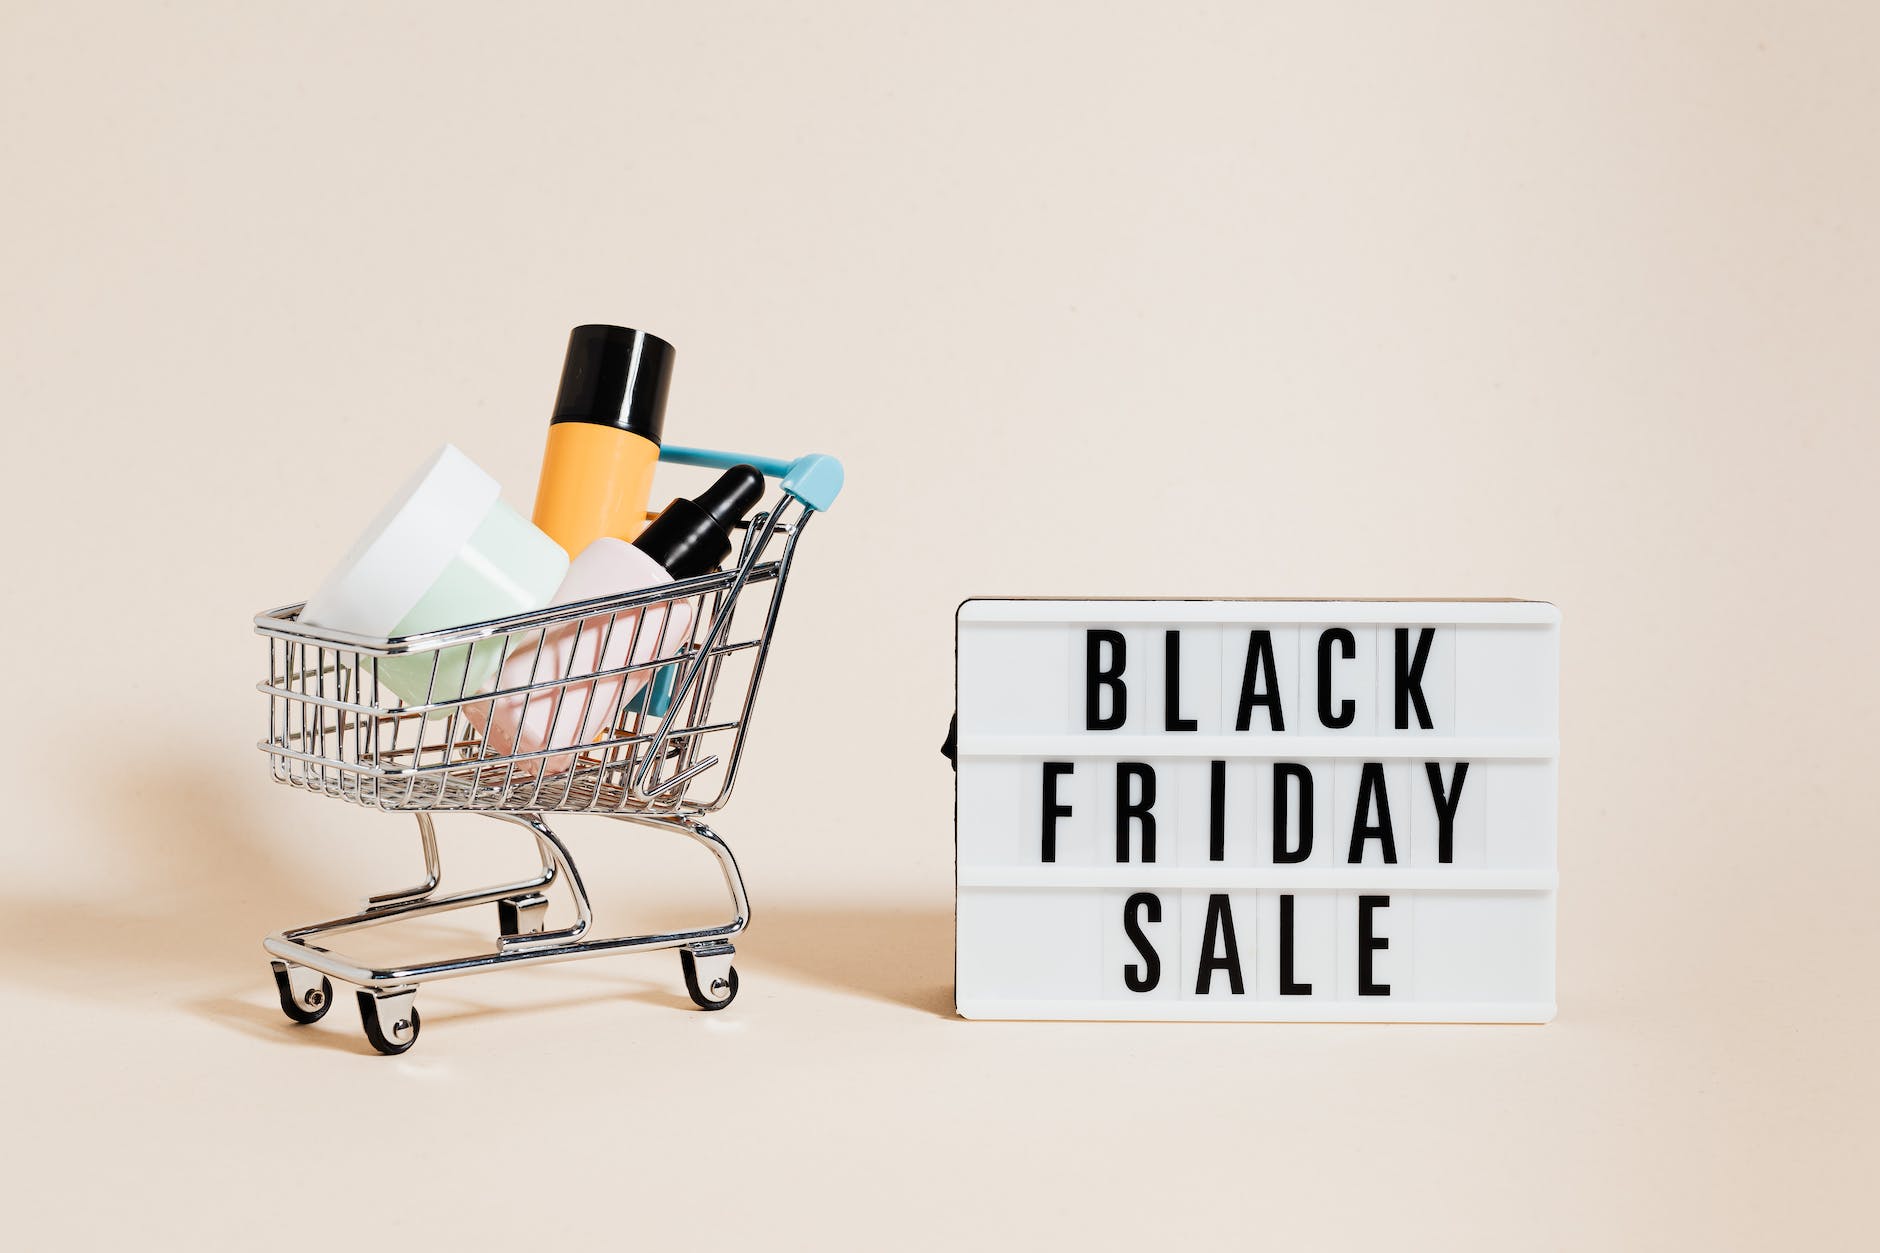 products in a shopping cart beside a black friday sale signage on beige background